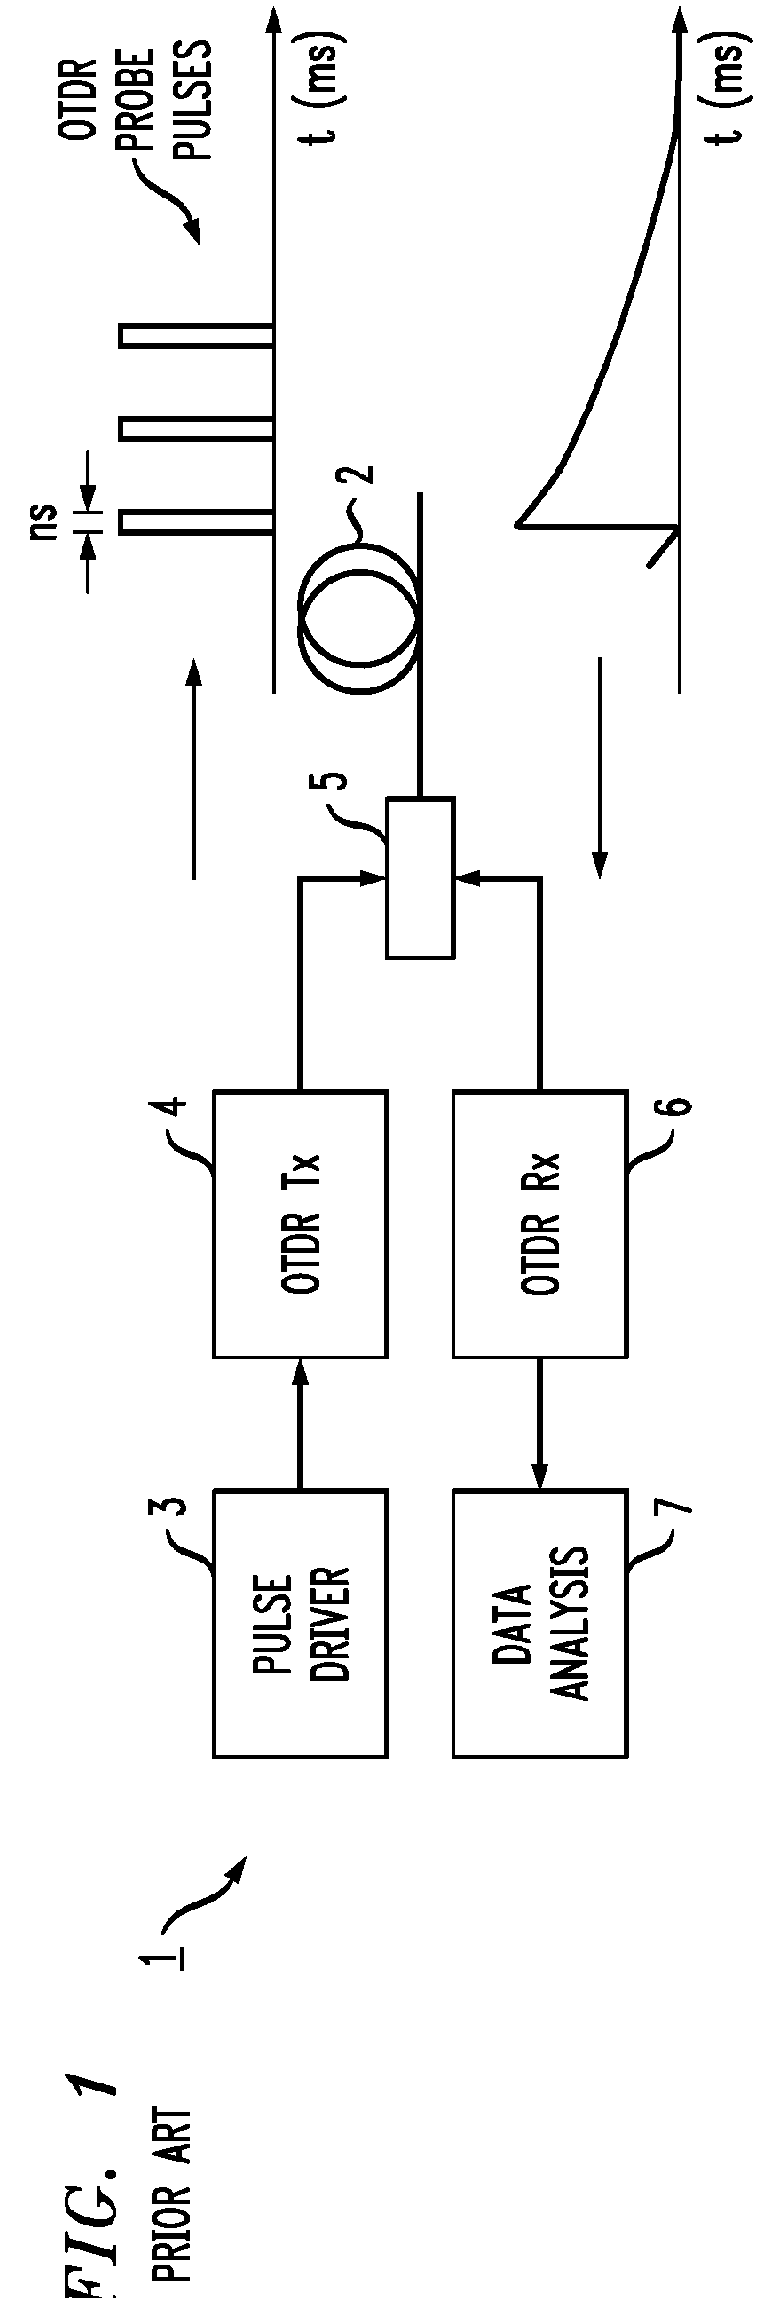 Edge Propagating Optical Time Domain Reflectometer And Method Of Using The Same